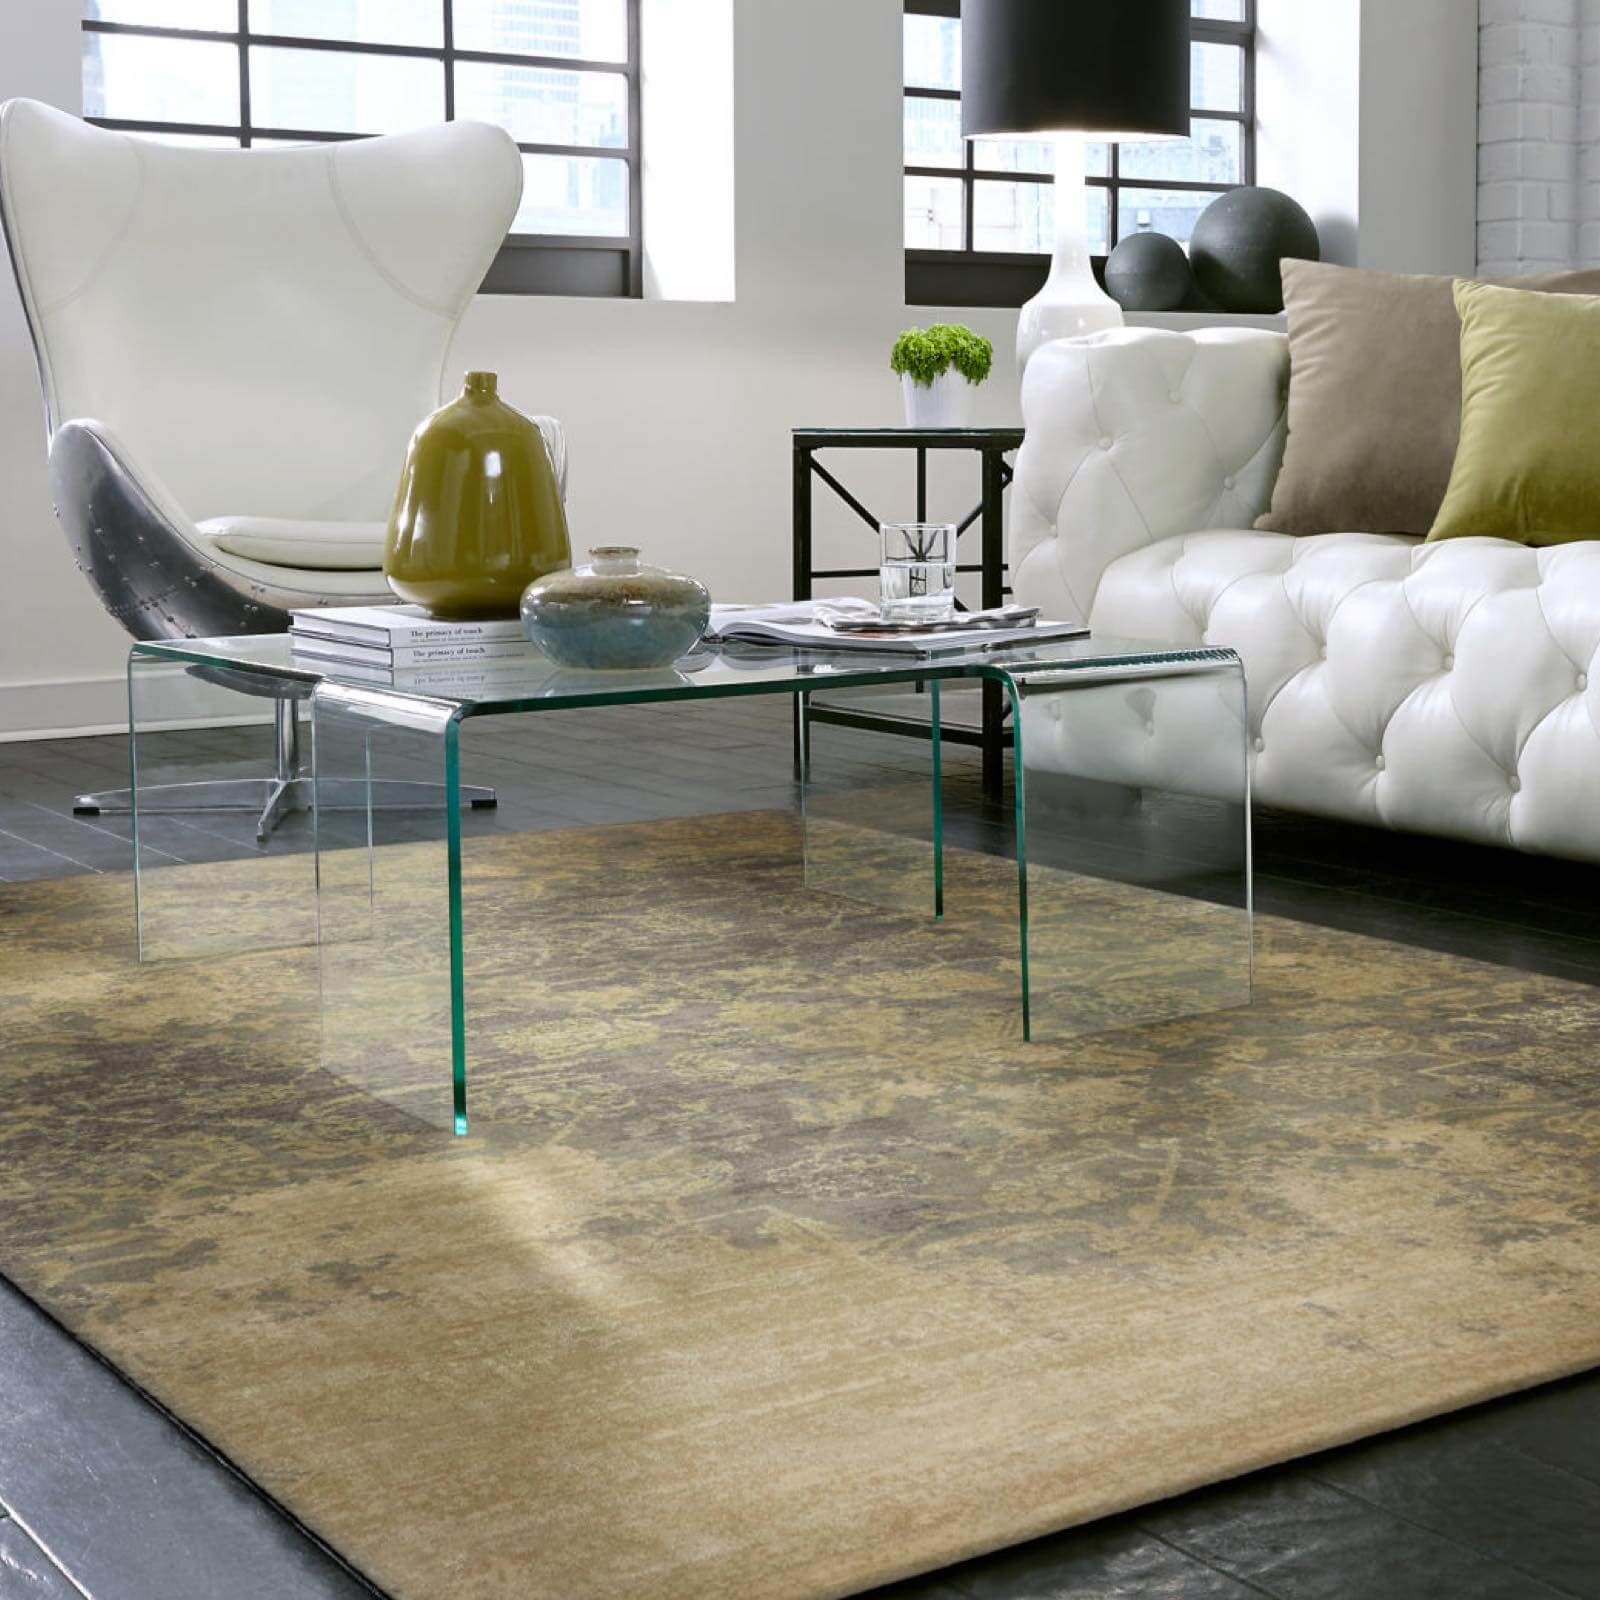 Area Rug in home | Carpet Selections | Prospect and Louisville, KY